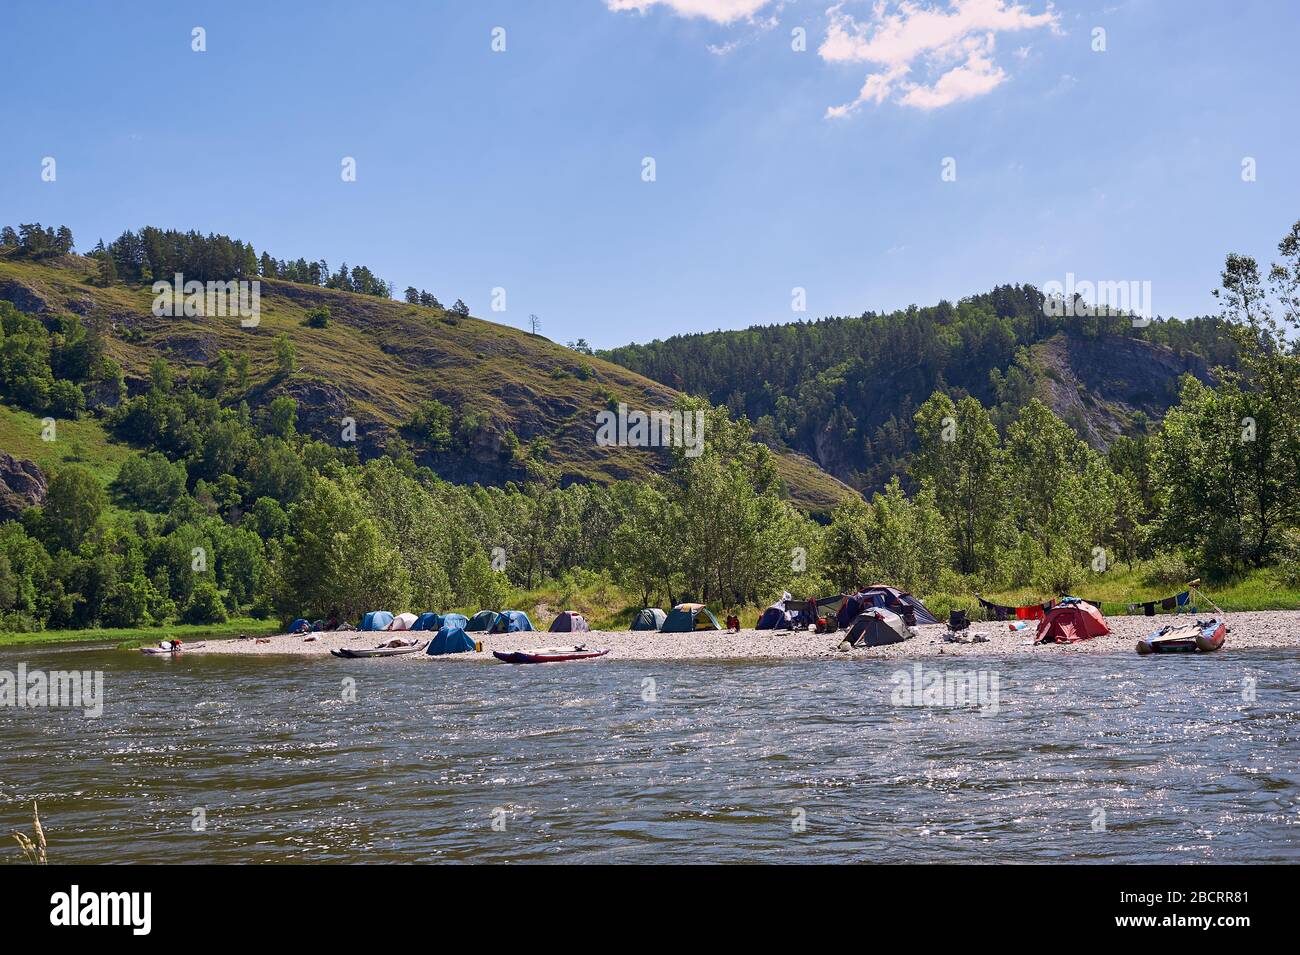 Tourist camp on the background of the river. Tents under the blue sky. Rafting on a mountain river. Stock Photo